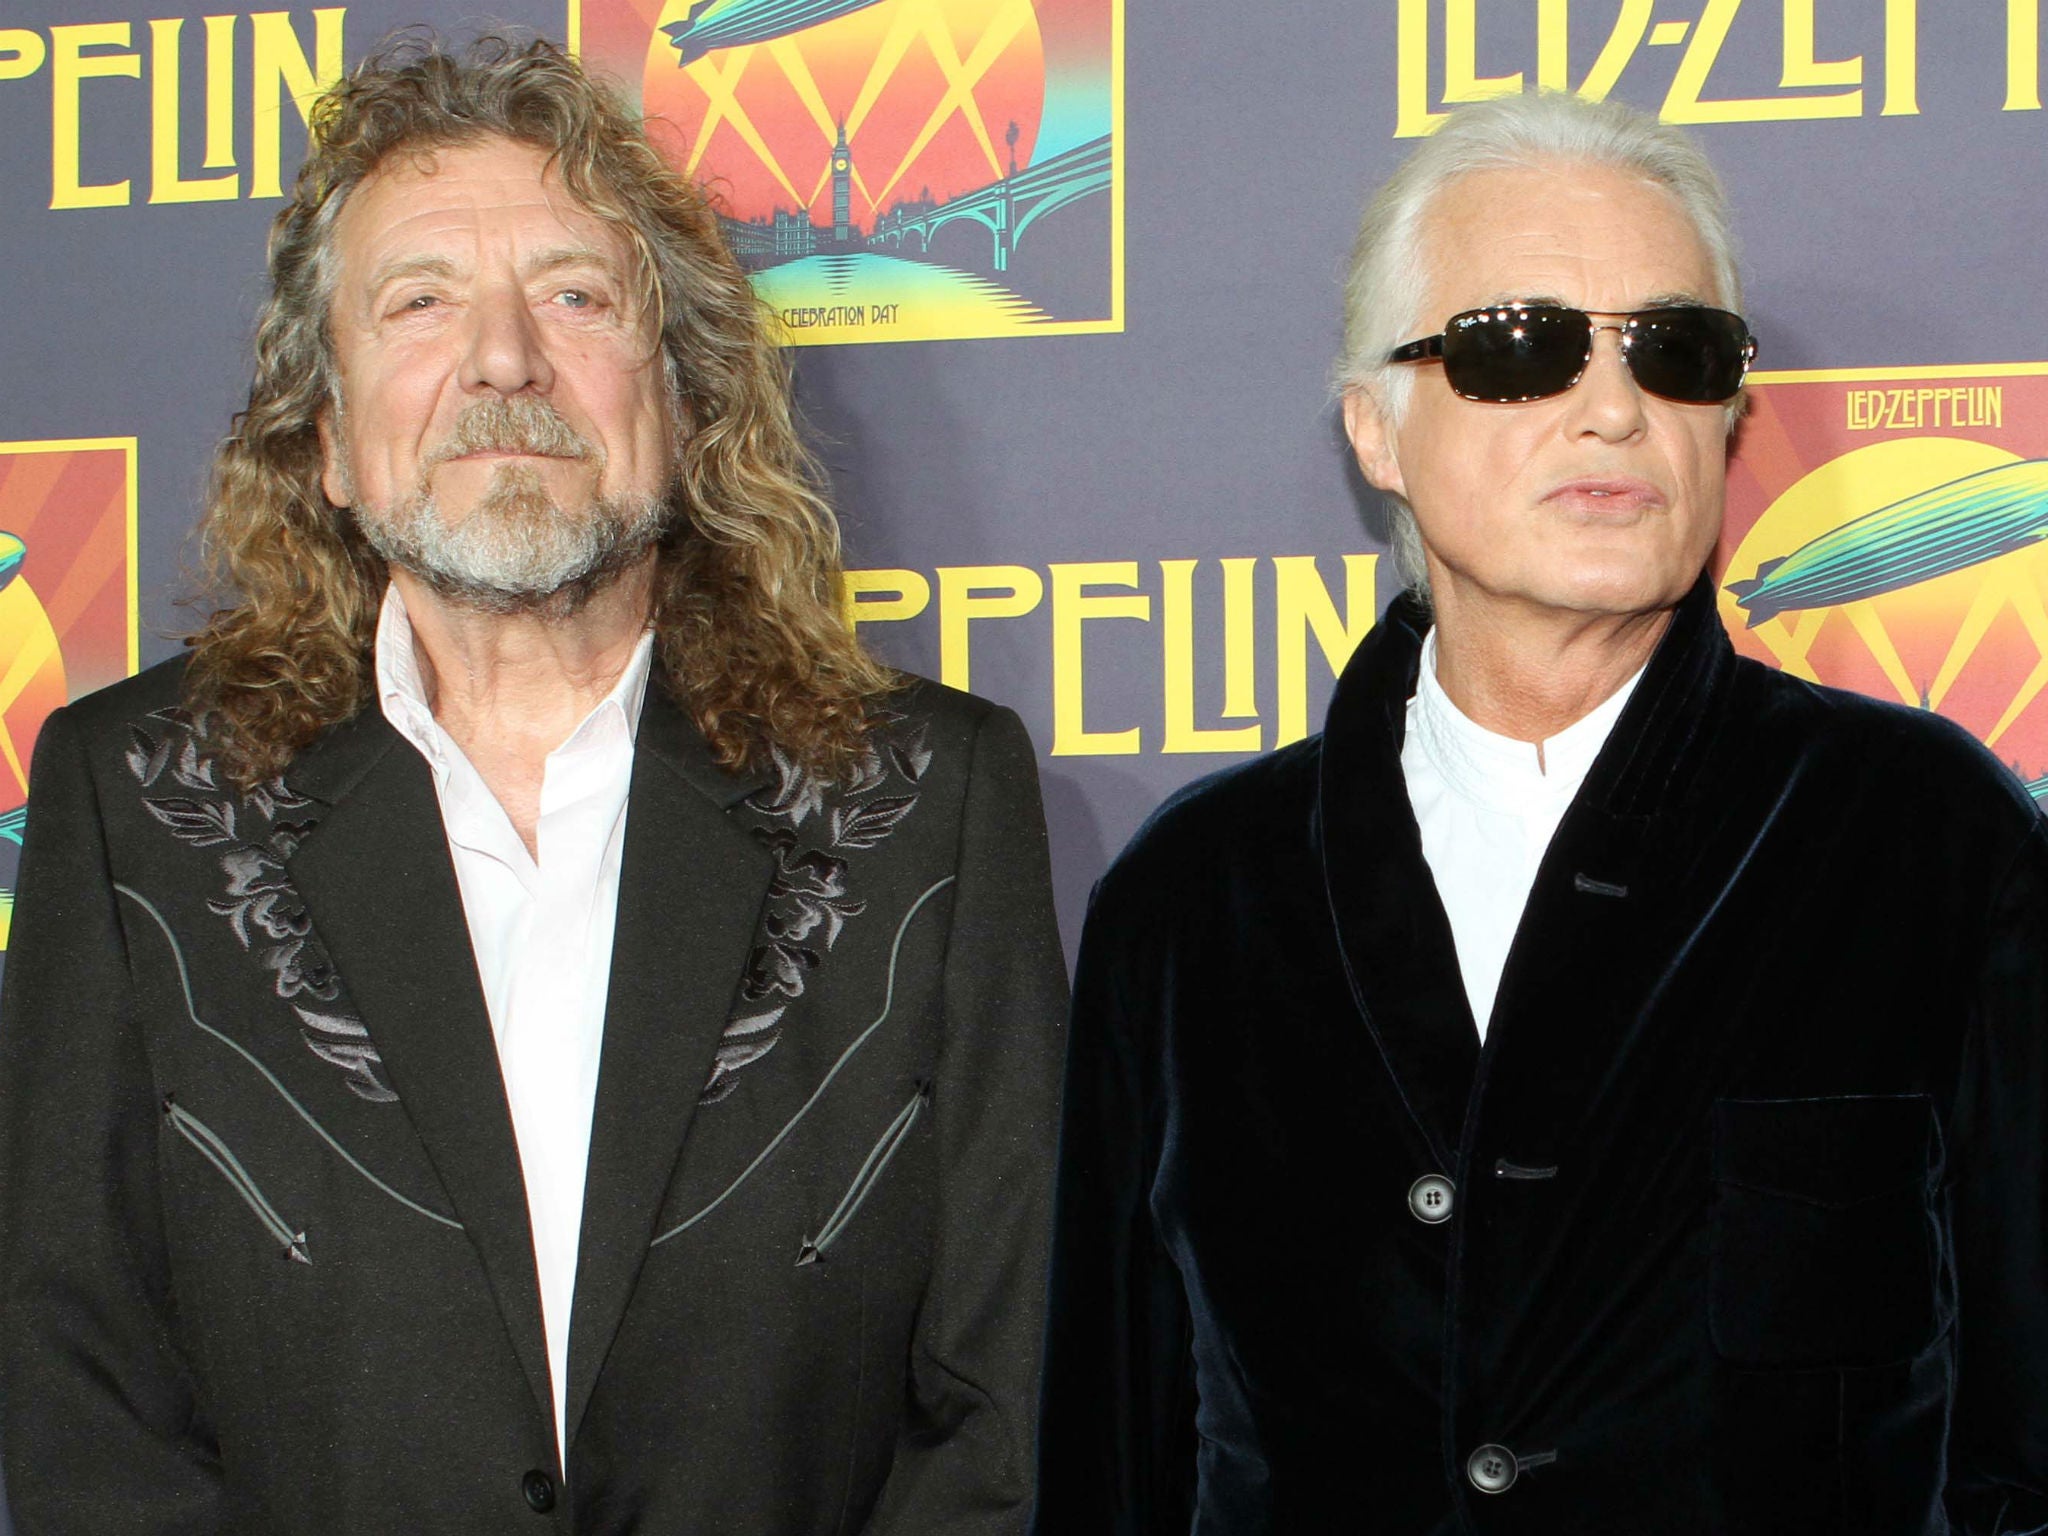 Robert Plant and Jimmy Page are accused of copying 'Stairway to Heaven' from Spirit song 'Taurus'